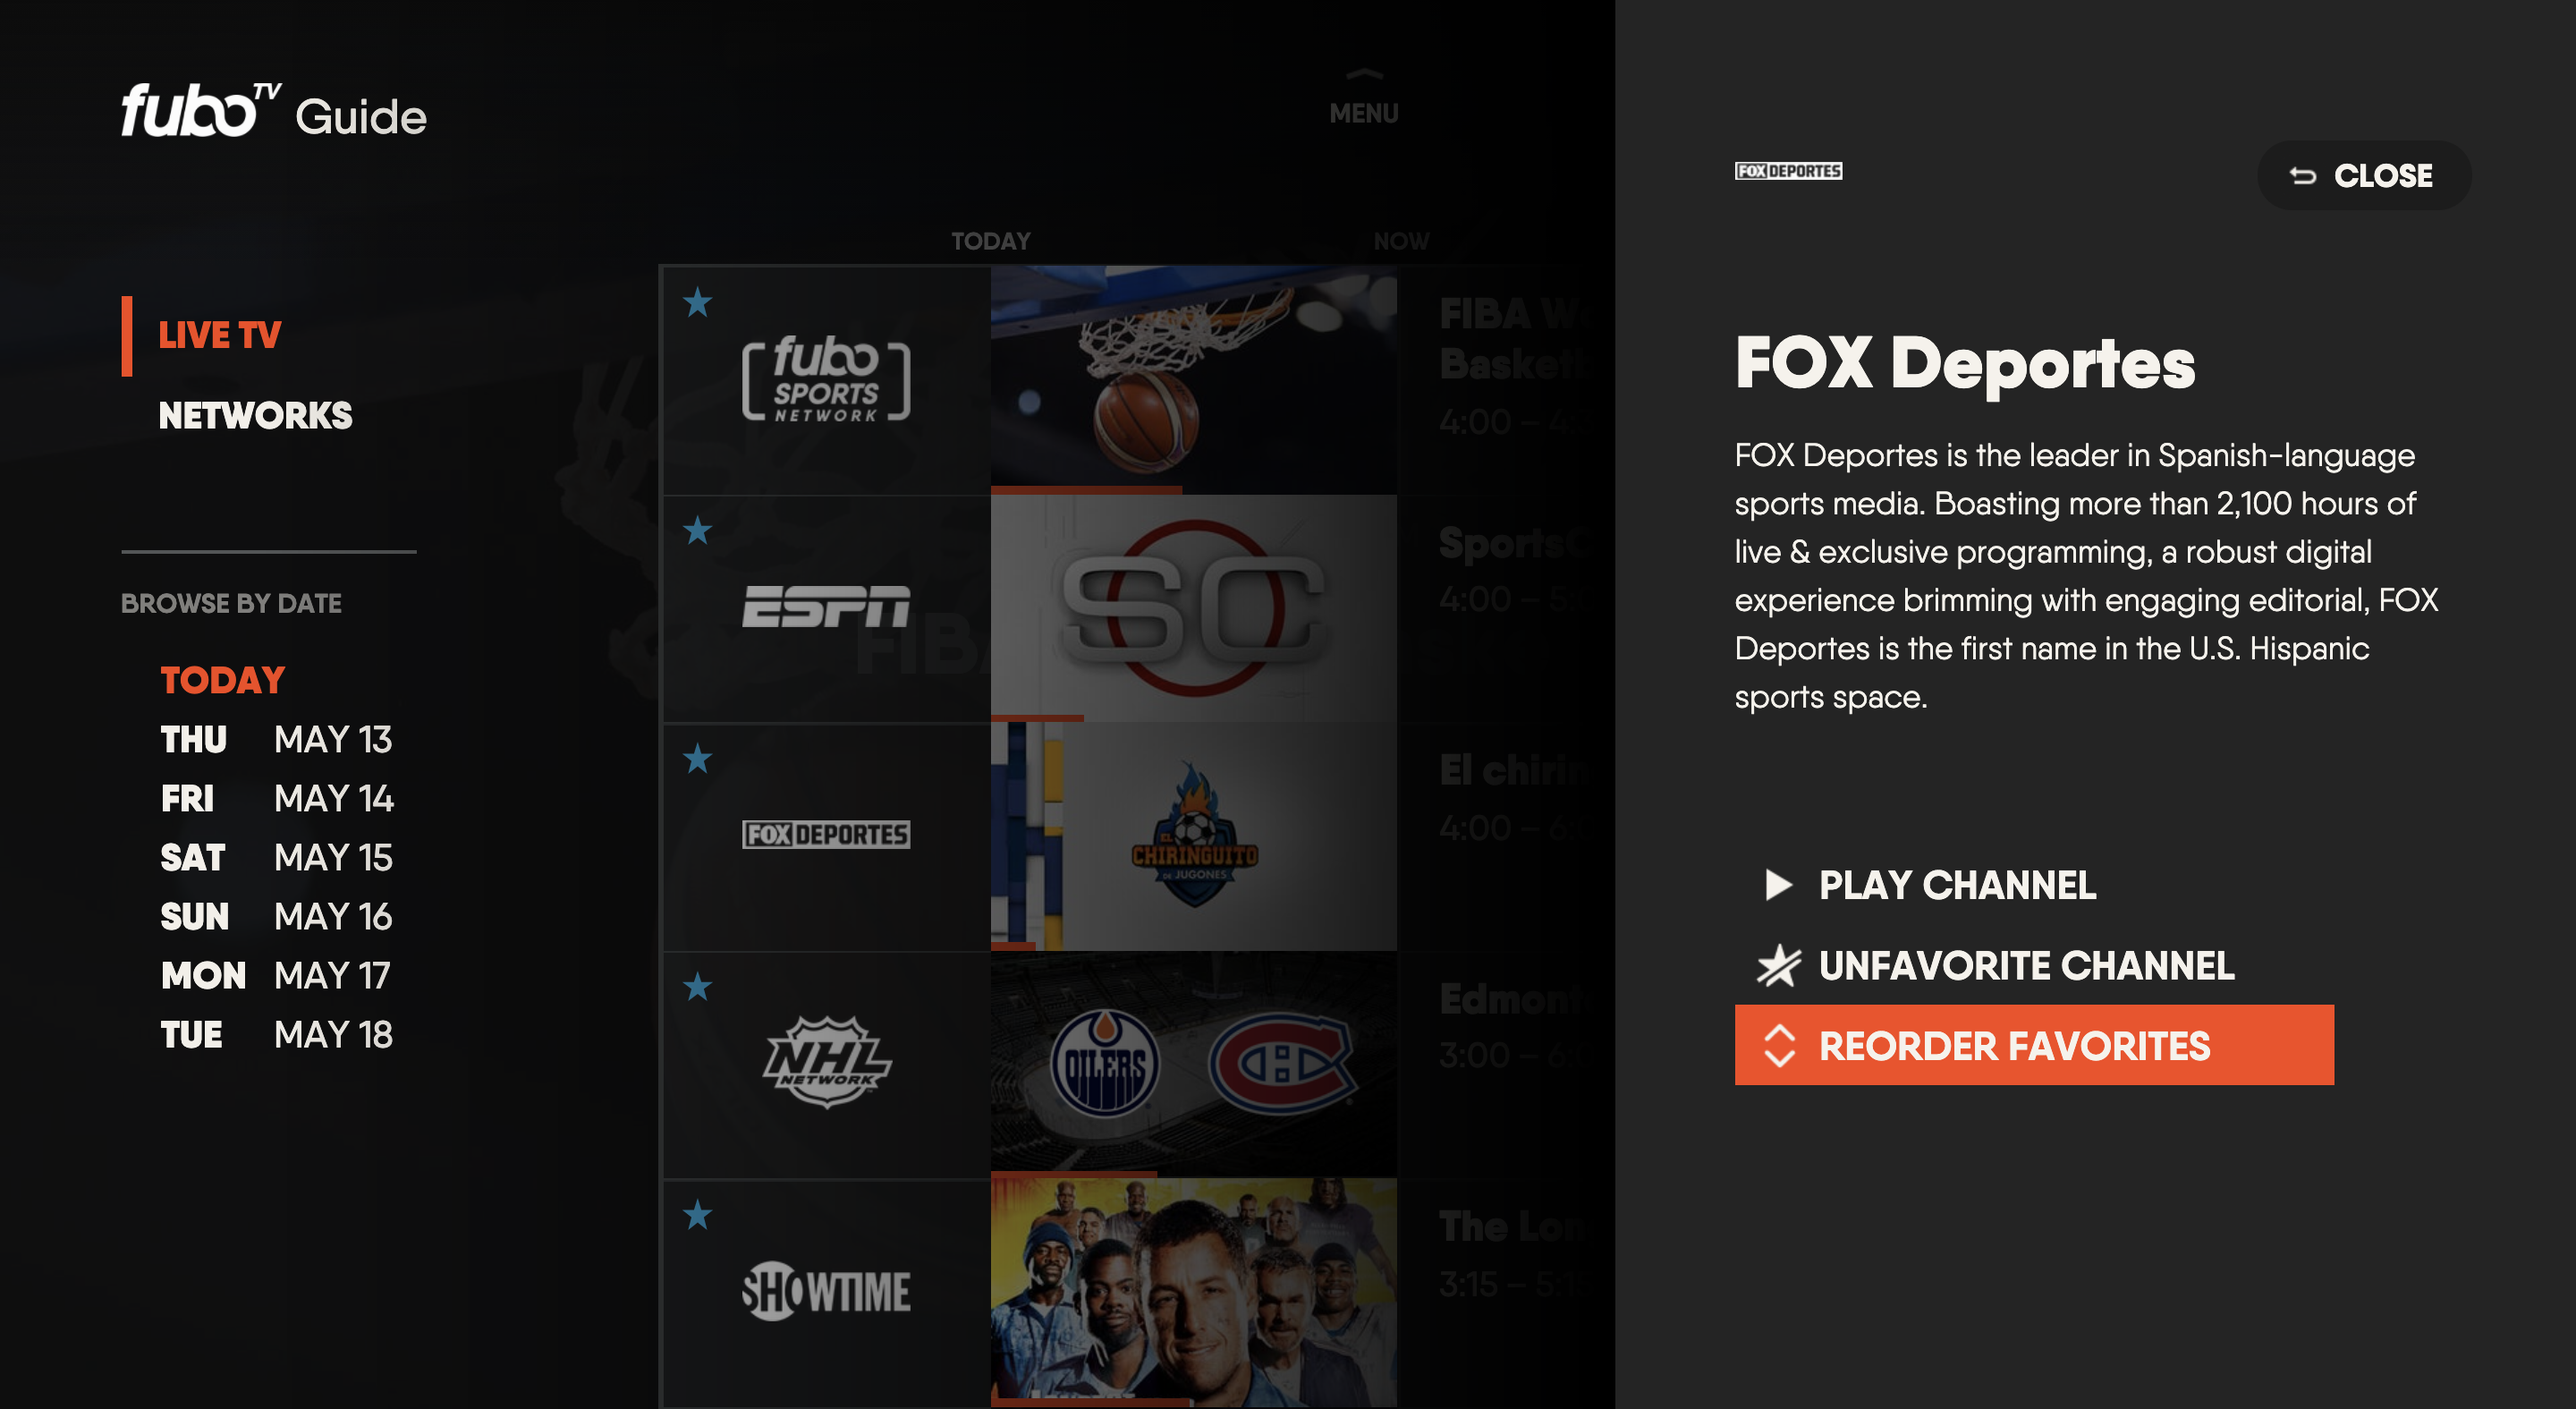 CHANNEL INFORMATION screen for the FuboTV app on a smart TV with REORDER FAVORITES highlighted